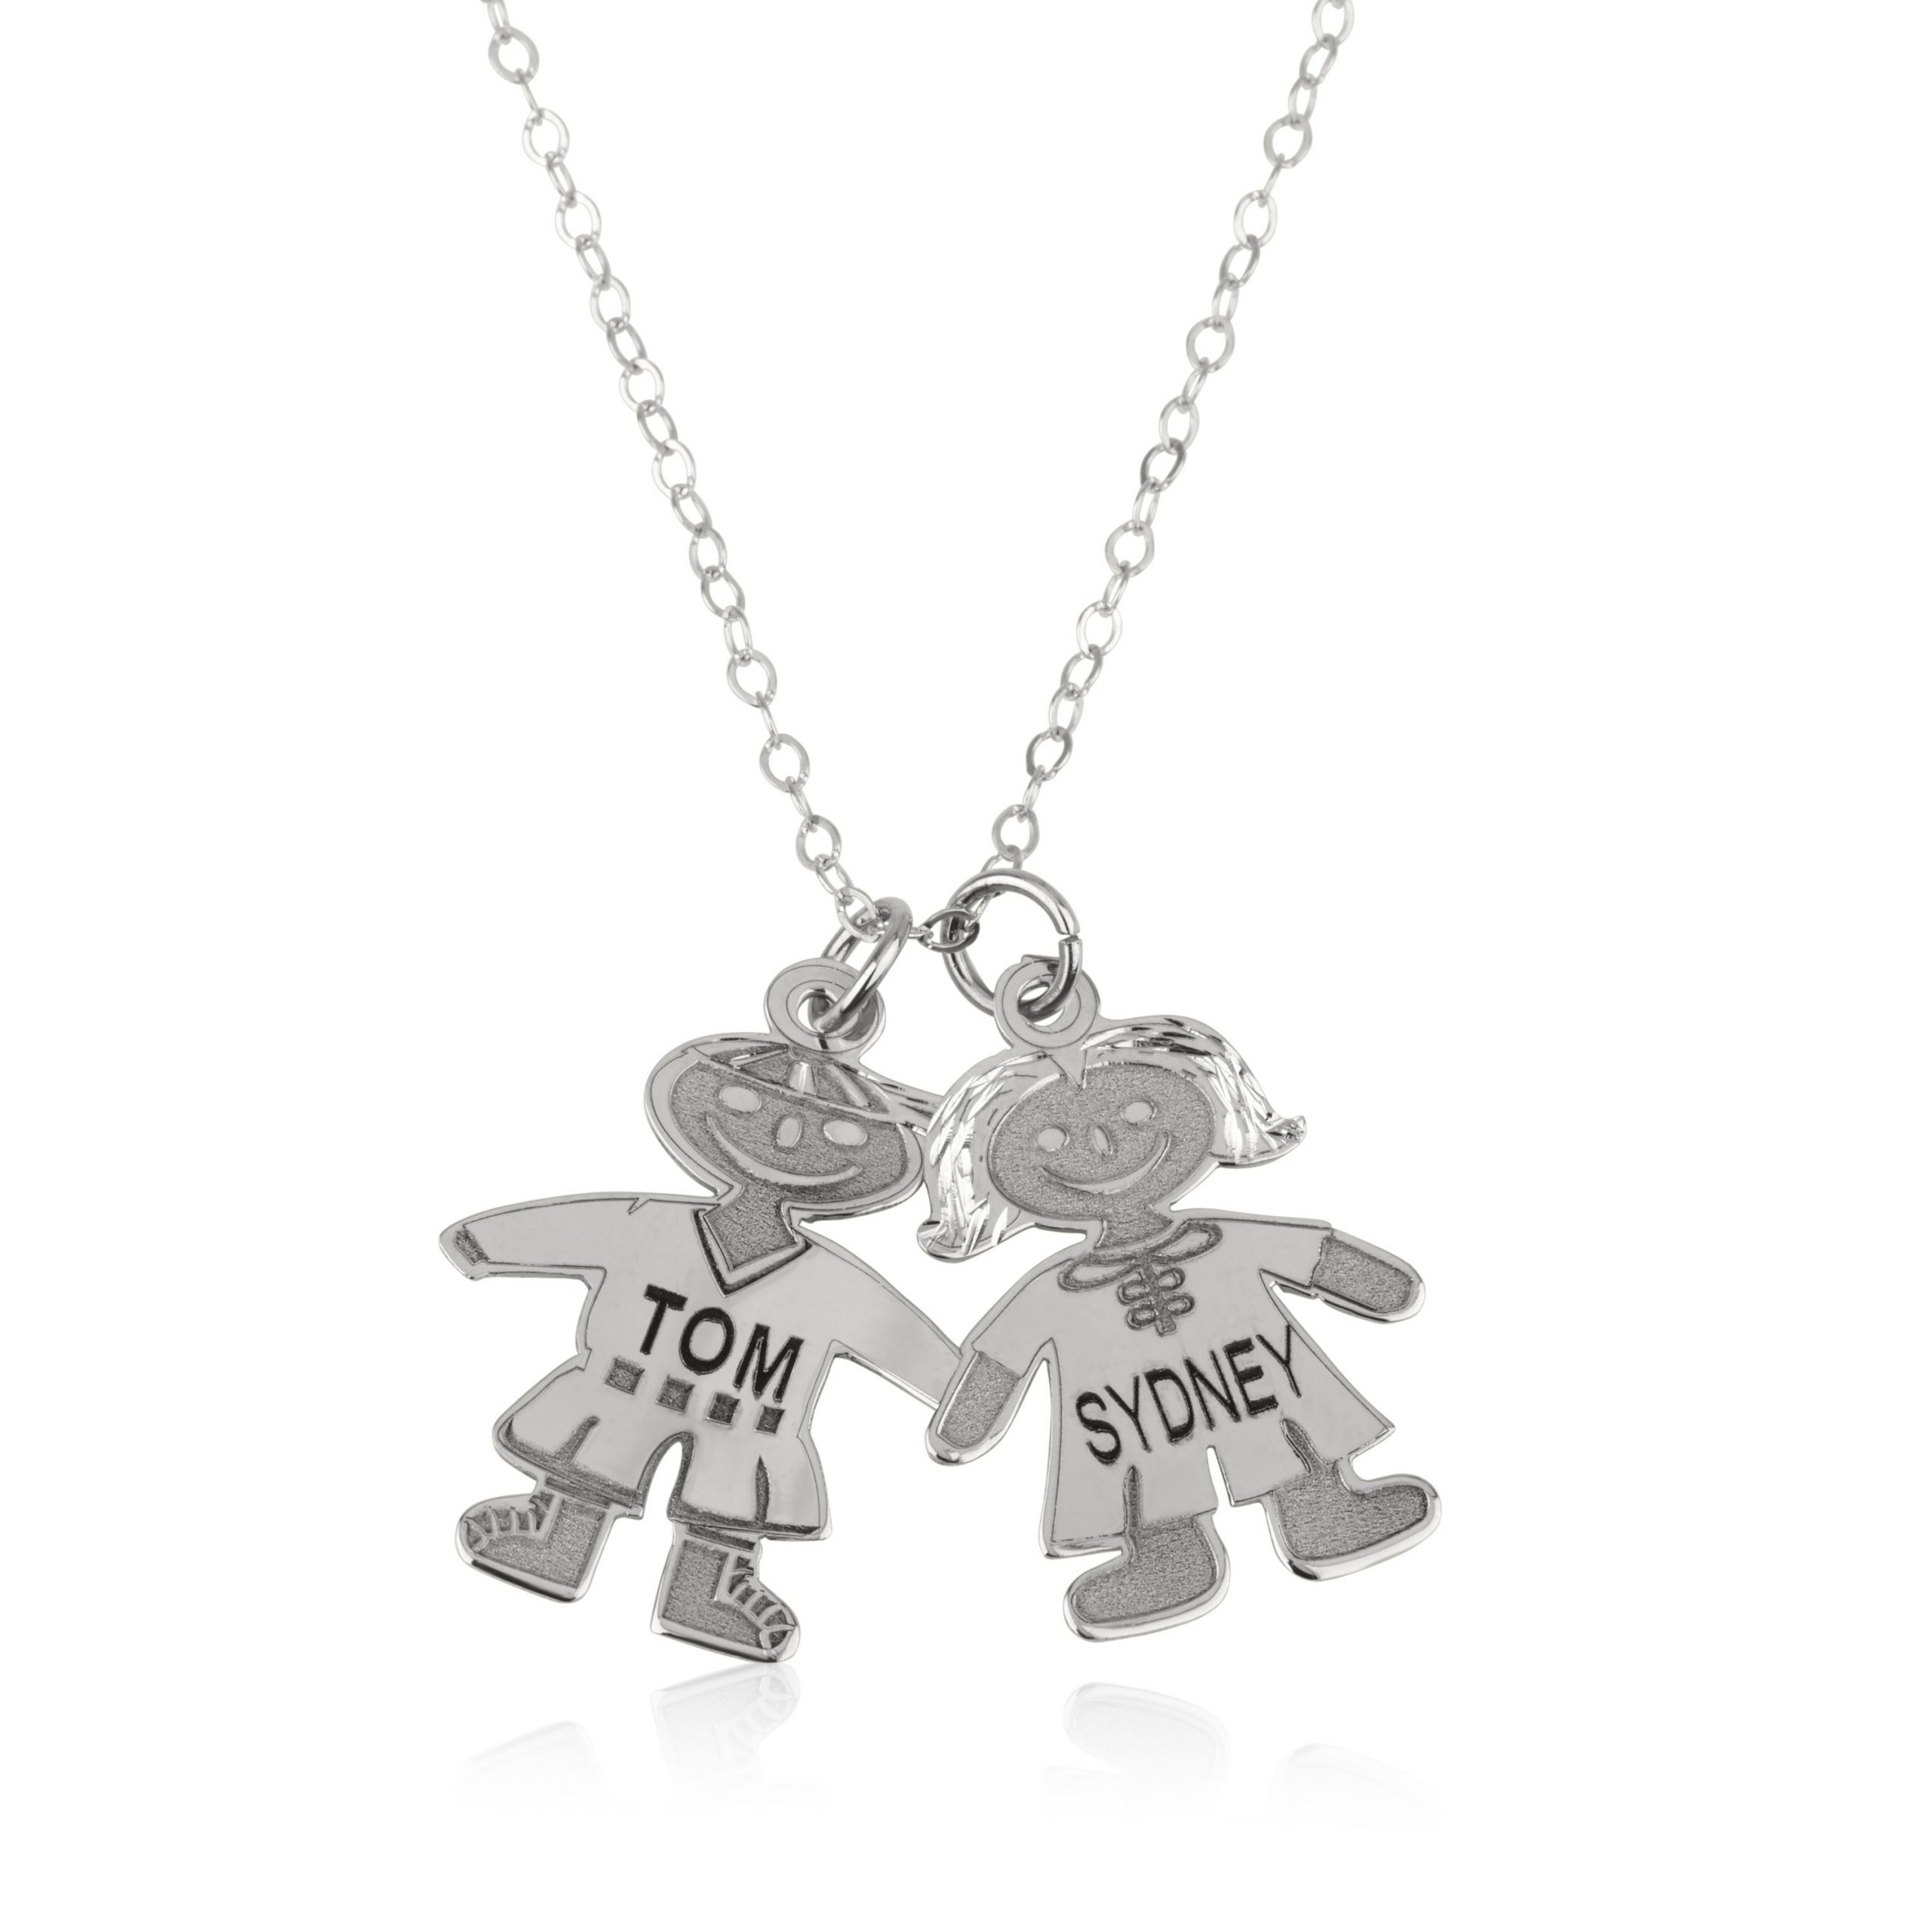 Mom Necklace White Gold
 Personalized White Gold Child Engraved Mom necklace